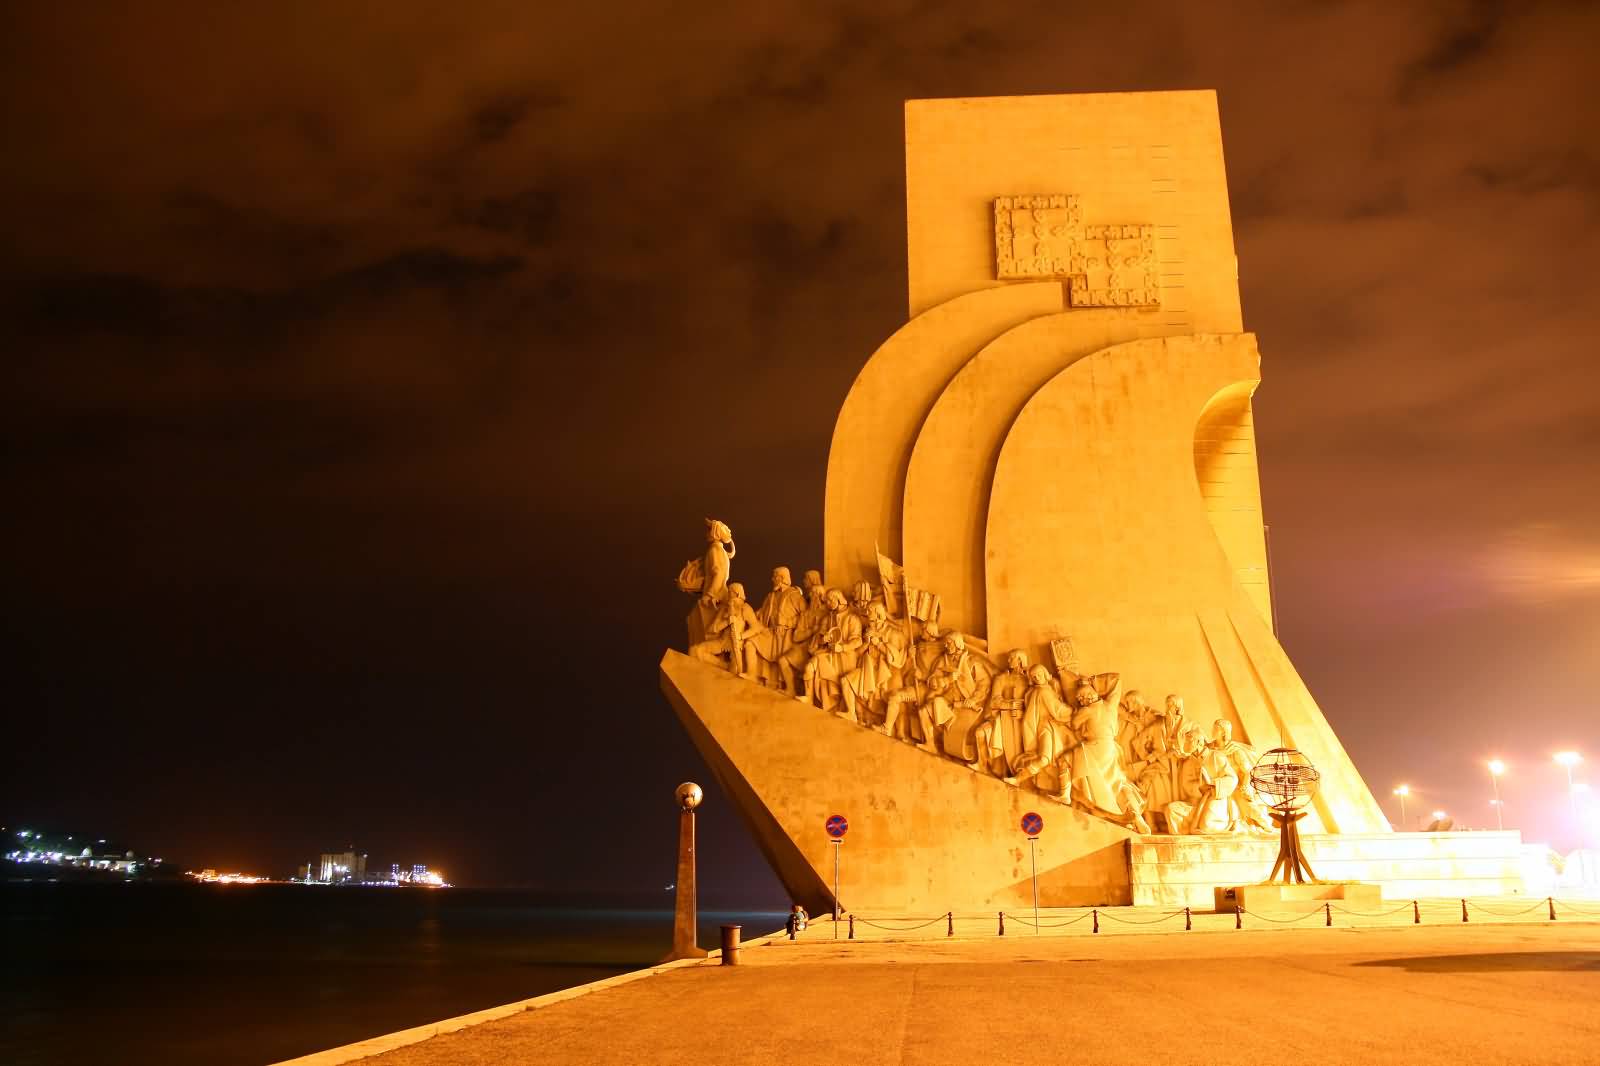 Padrao dos Descobrimentos Looks Adorable With Night Lights